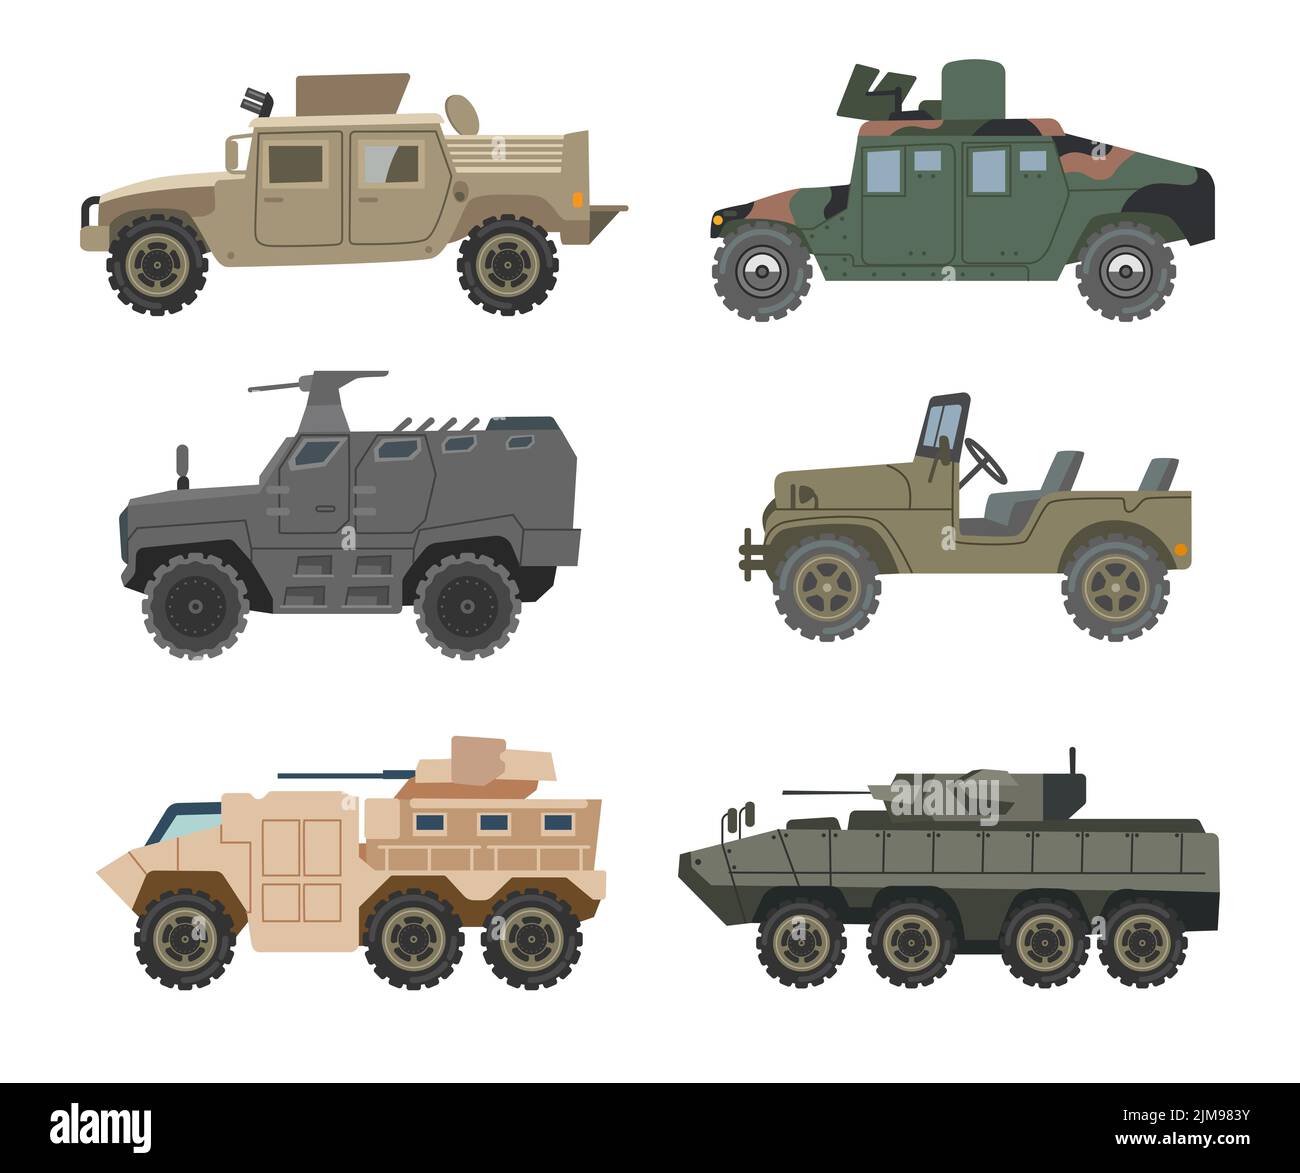 Different military vehicles vector illustrations set. Collection of drawings of armored cars, trucks, tanks, Humvee for armed forces on white backgrou Stock Vector